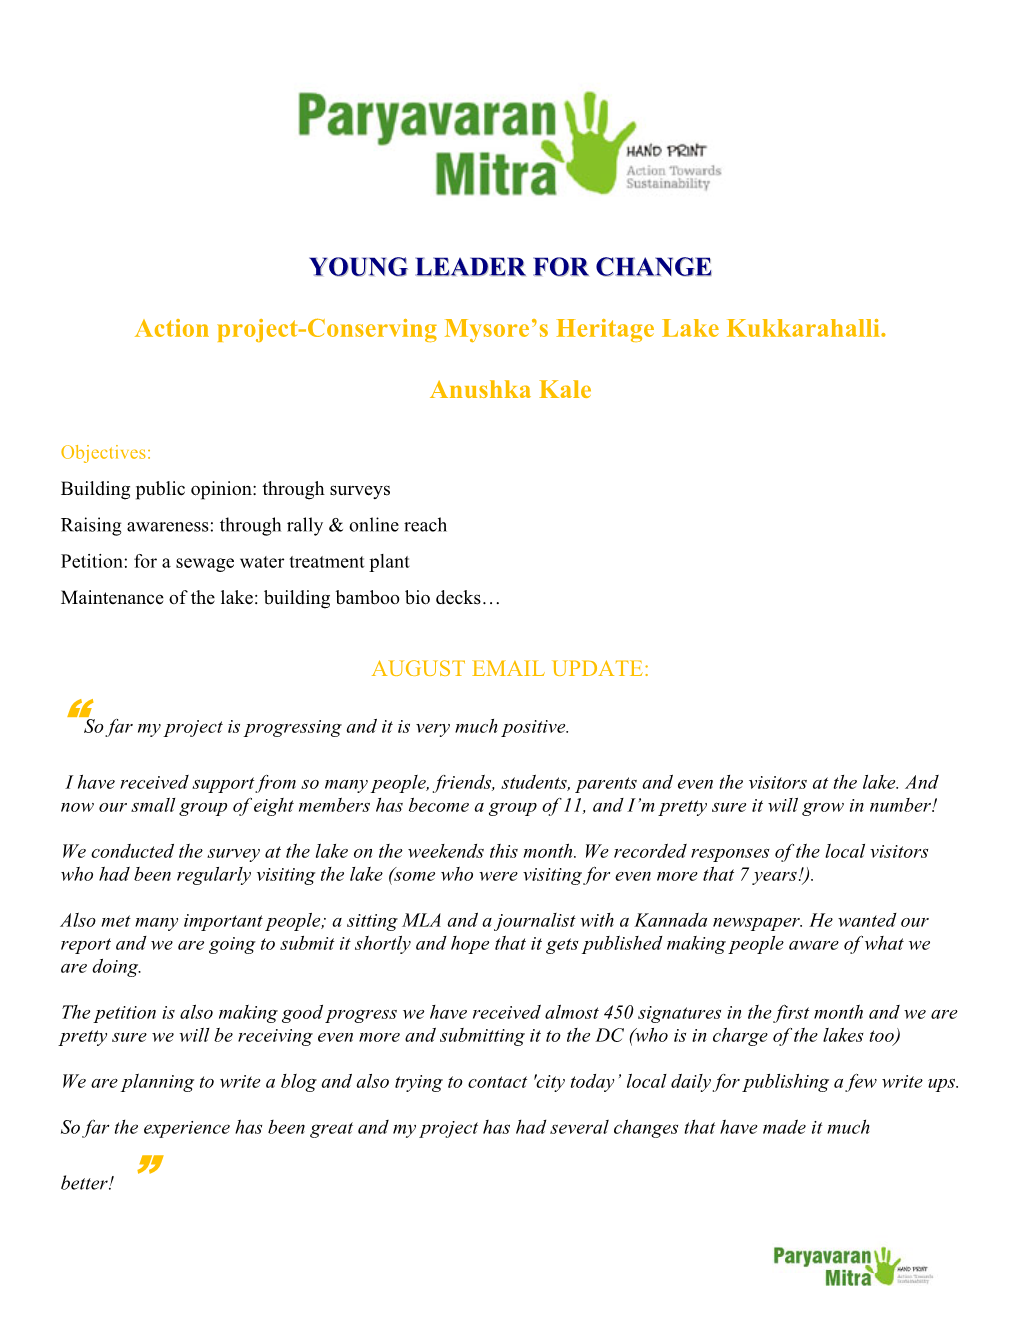 YOUNG LEADER for CHANGE Action Project-Conserving Mysore's